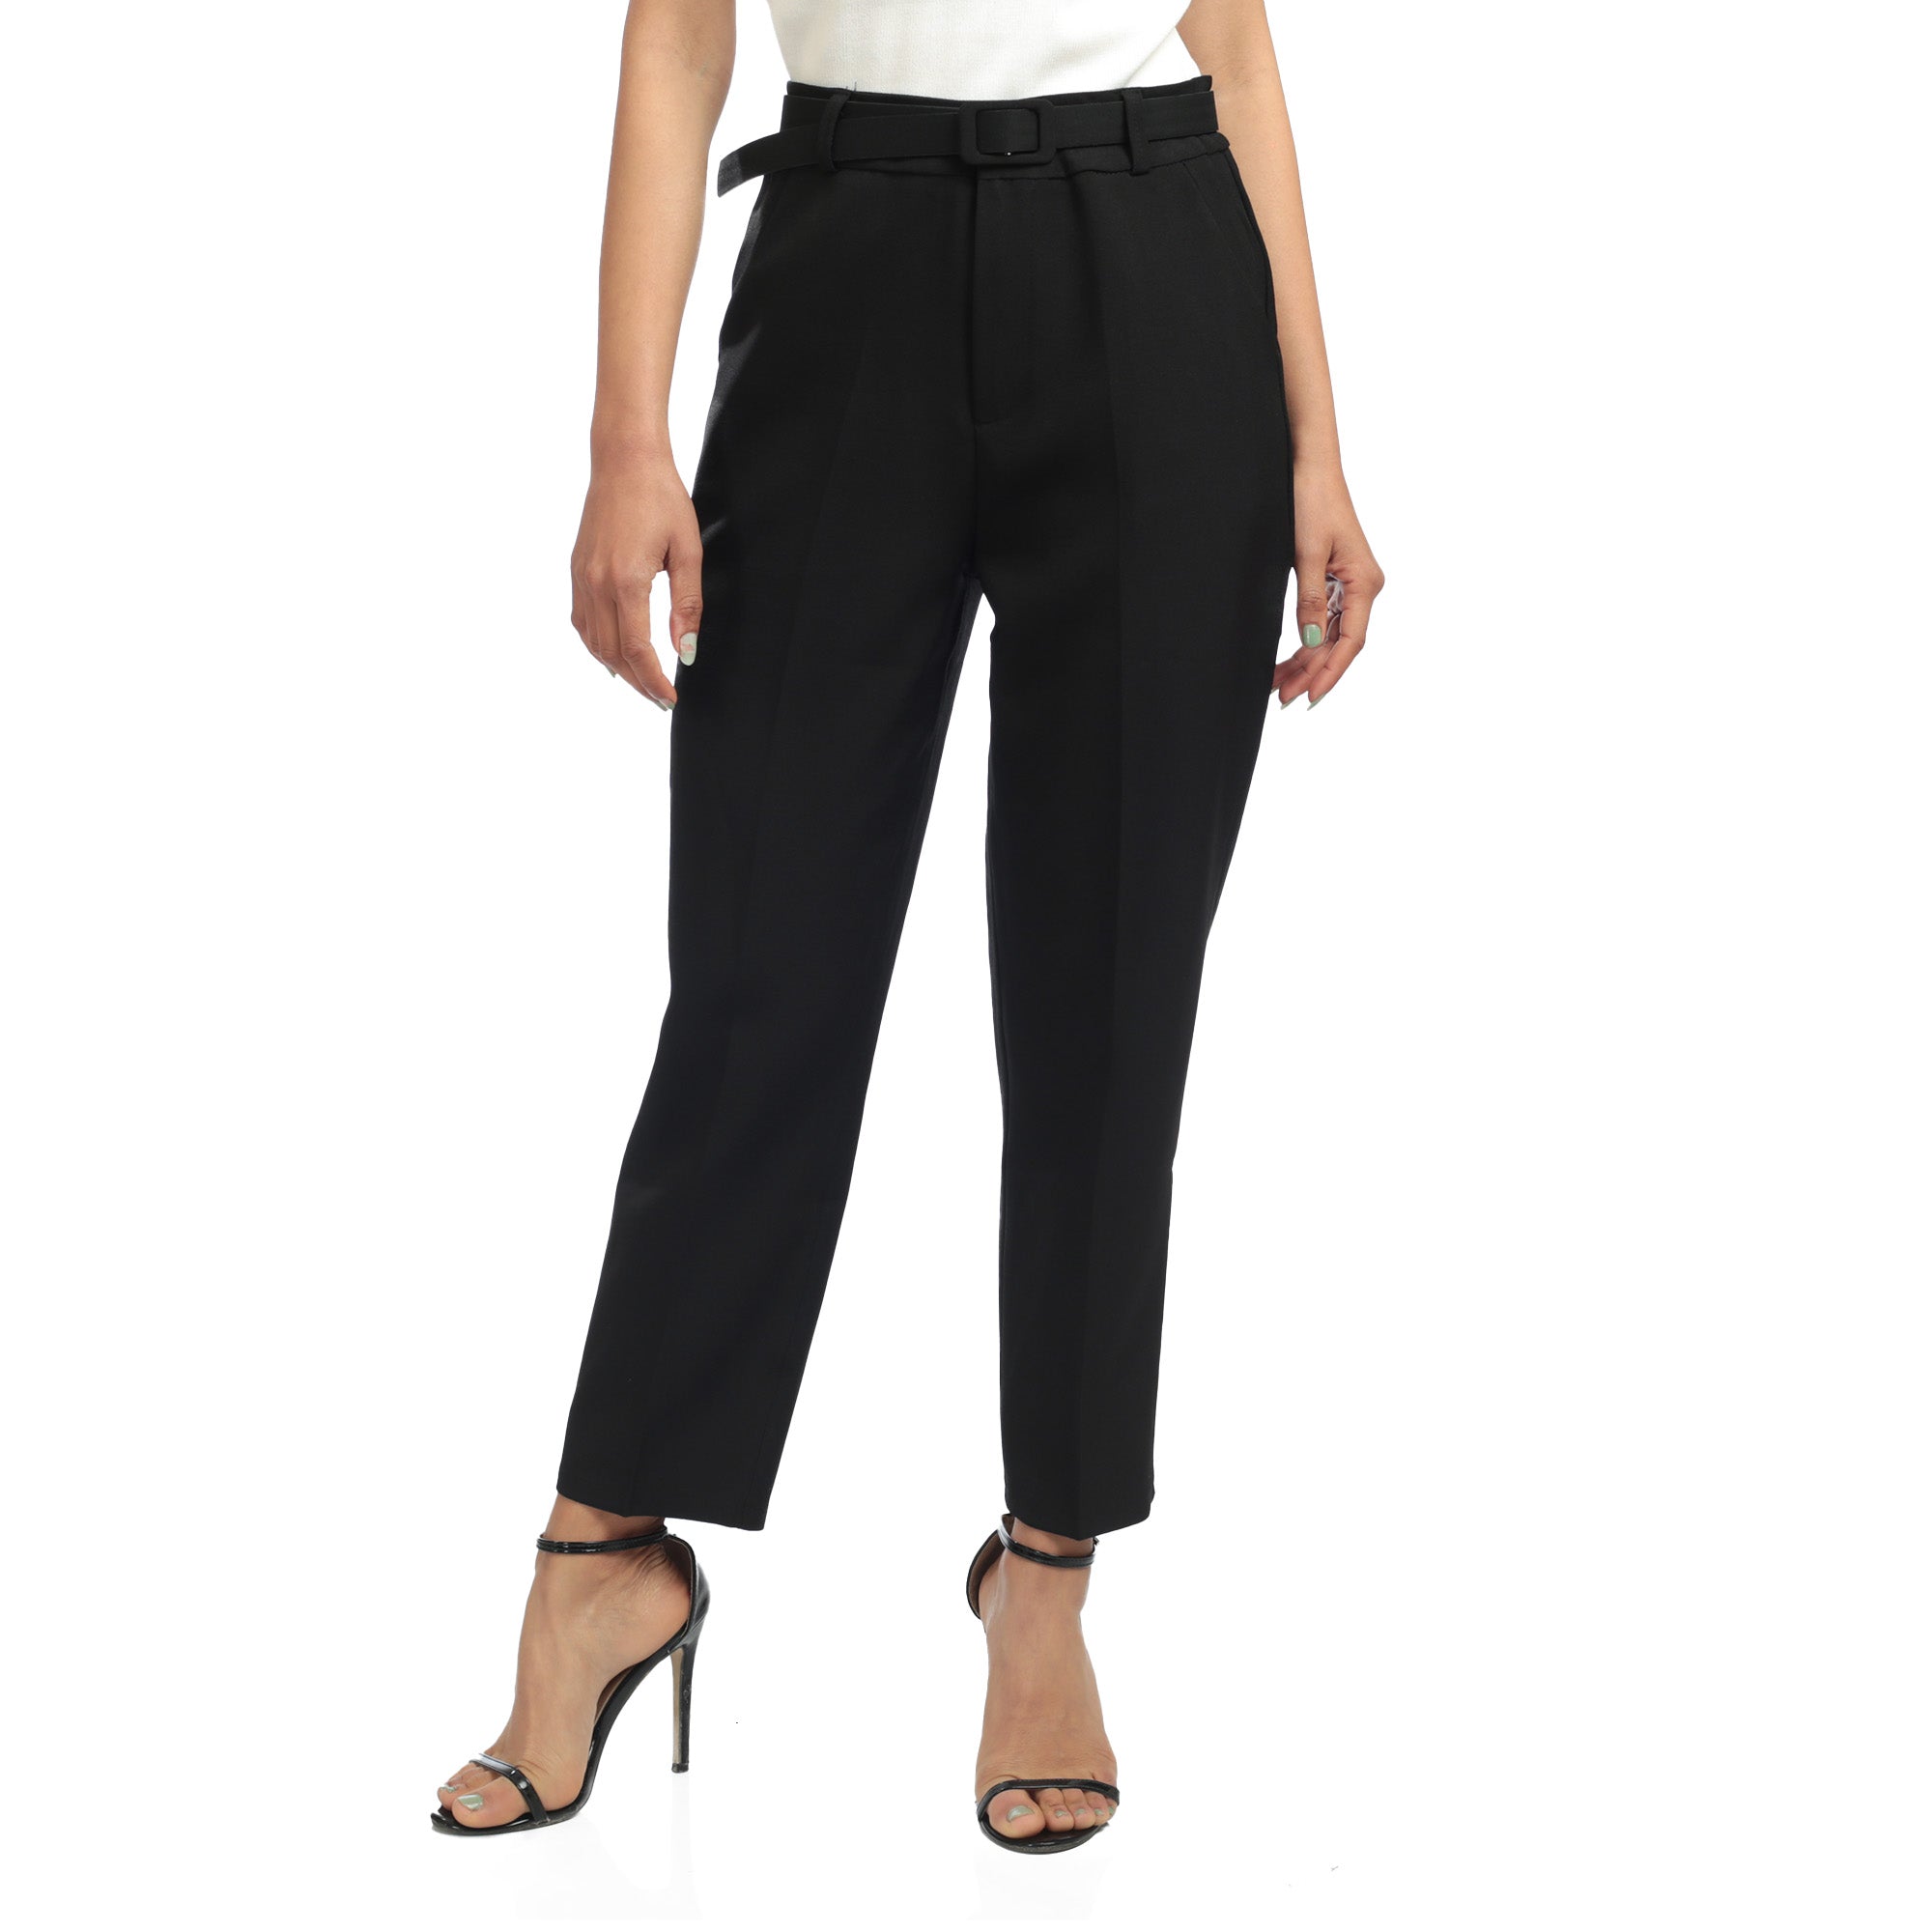 New Black Formal Pant With Belt For Women price in Nepal